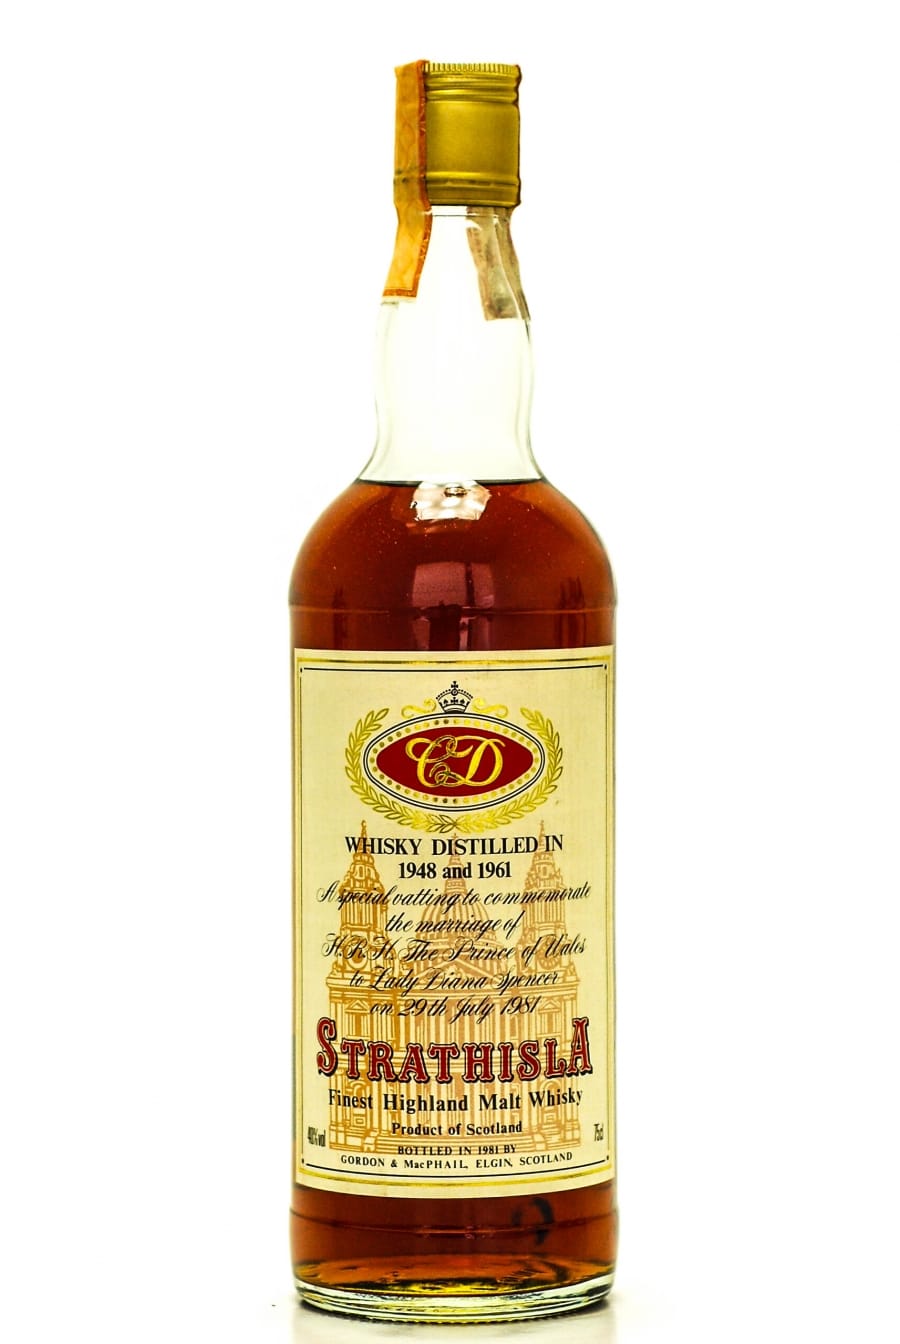 Strathisla - Strathisla Gordon & McPhail Distilled 1948 and 1961 bottled 1981 A special vatting to commemorate the marriage of H.R.H. The Prince of Wales to Lady Diana 40% 1948-1961